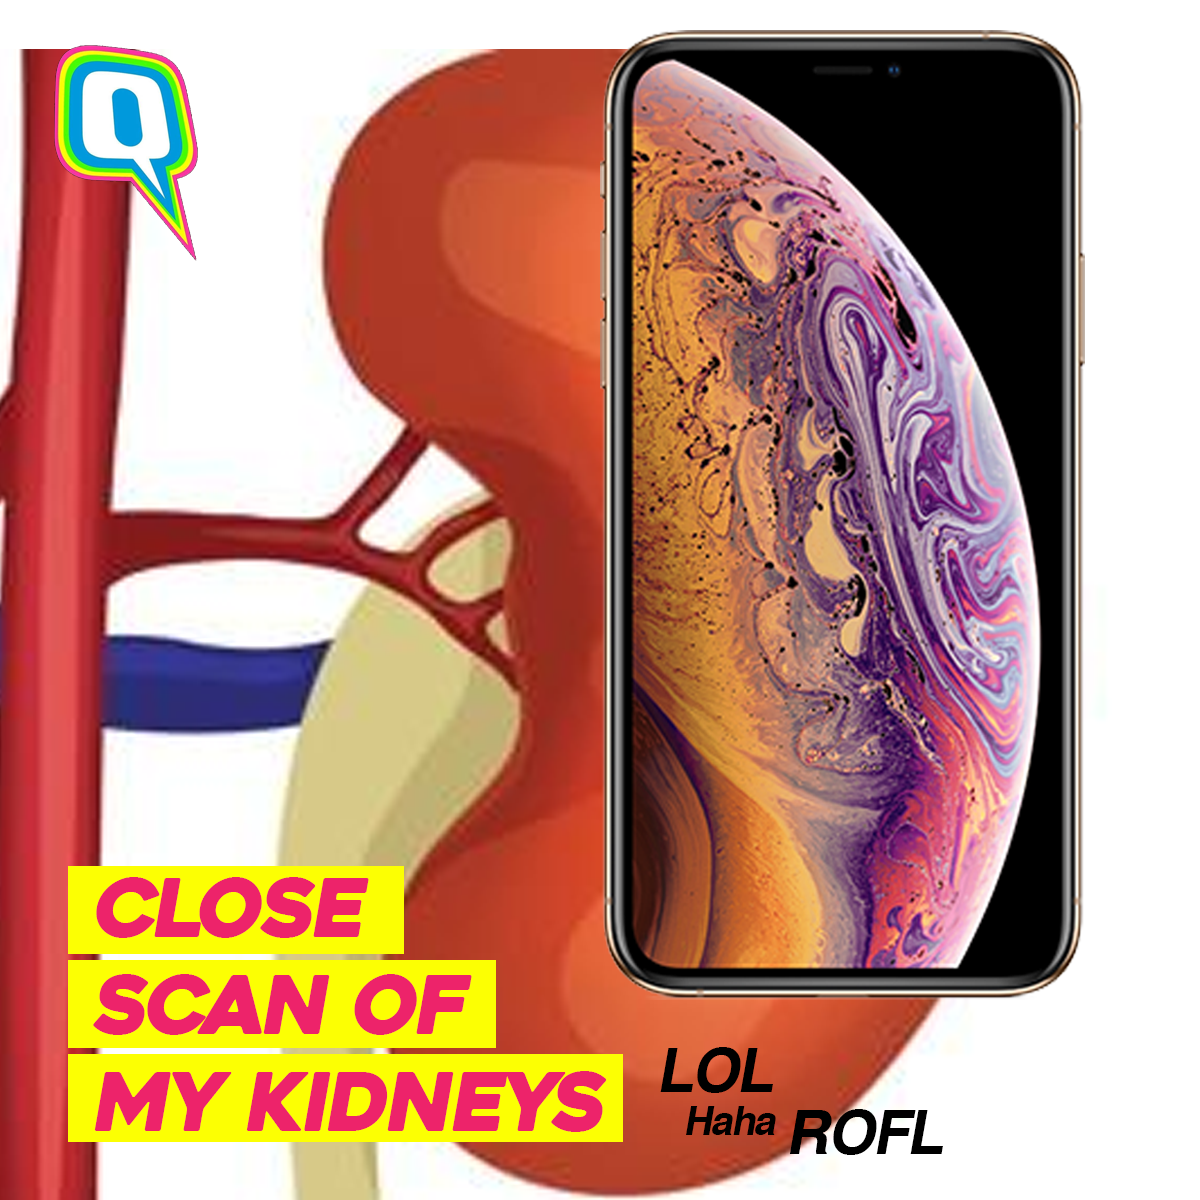 Original Like Every Other Kidney Joke Out There - Oneplus 6t Vs Iphone Xs Vs Pixel 3 , HD Wallpaper & Backgrounds